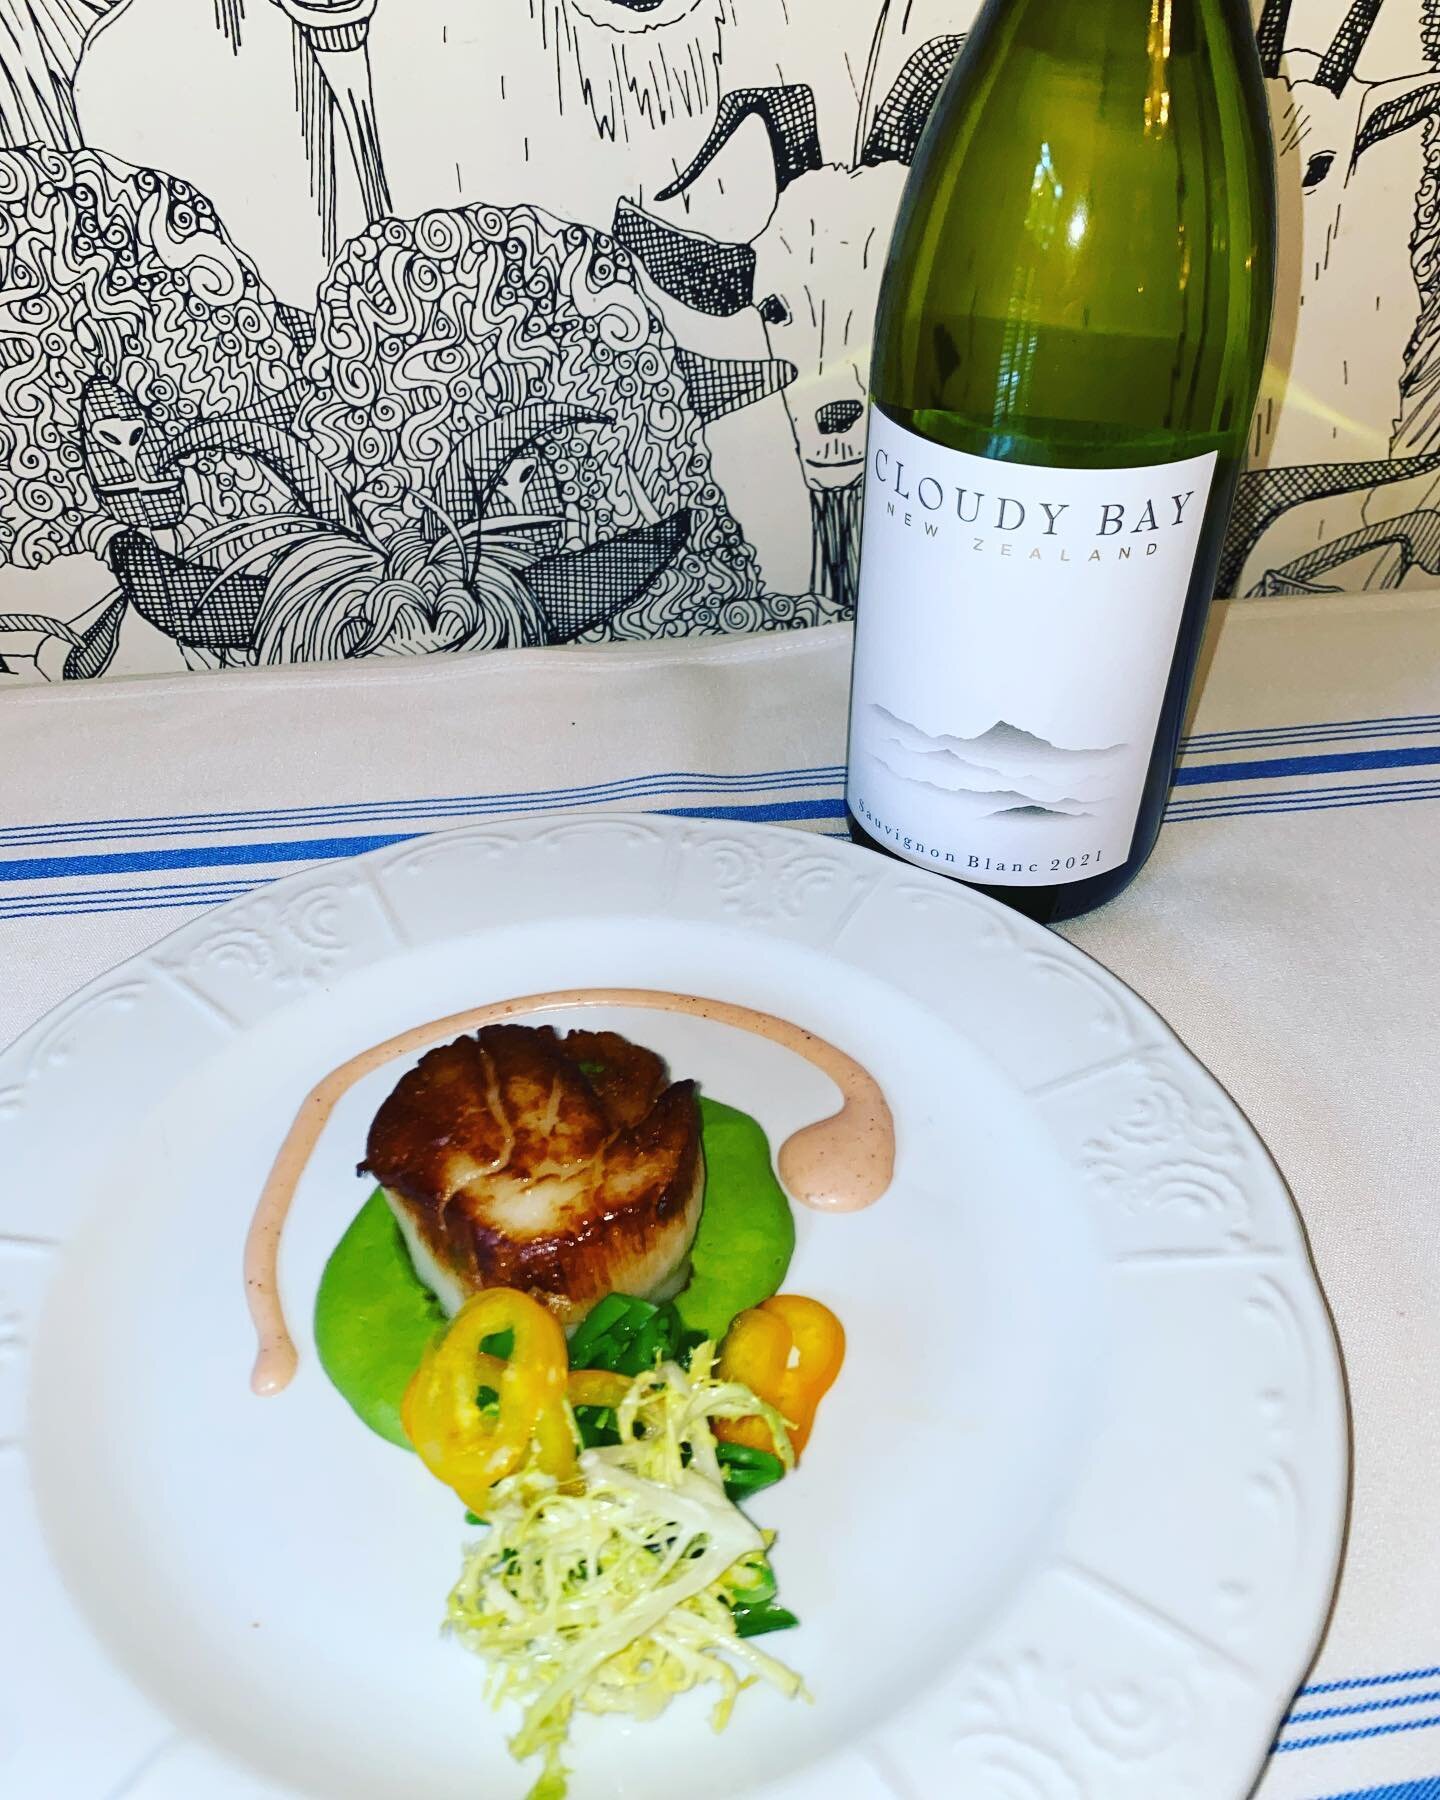 Second Course is Seared Scallop with sugar snap peas, pea puree and peach vinaigrette paired with Cloudy Bay Sauvignon Blanc, New Zealand, 2021 #thefrenchgoat #lewisburgwv #bonappalachia #simplygbv #bistrolife @moethennessy